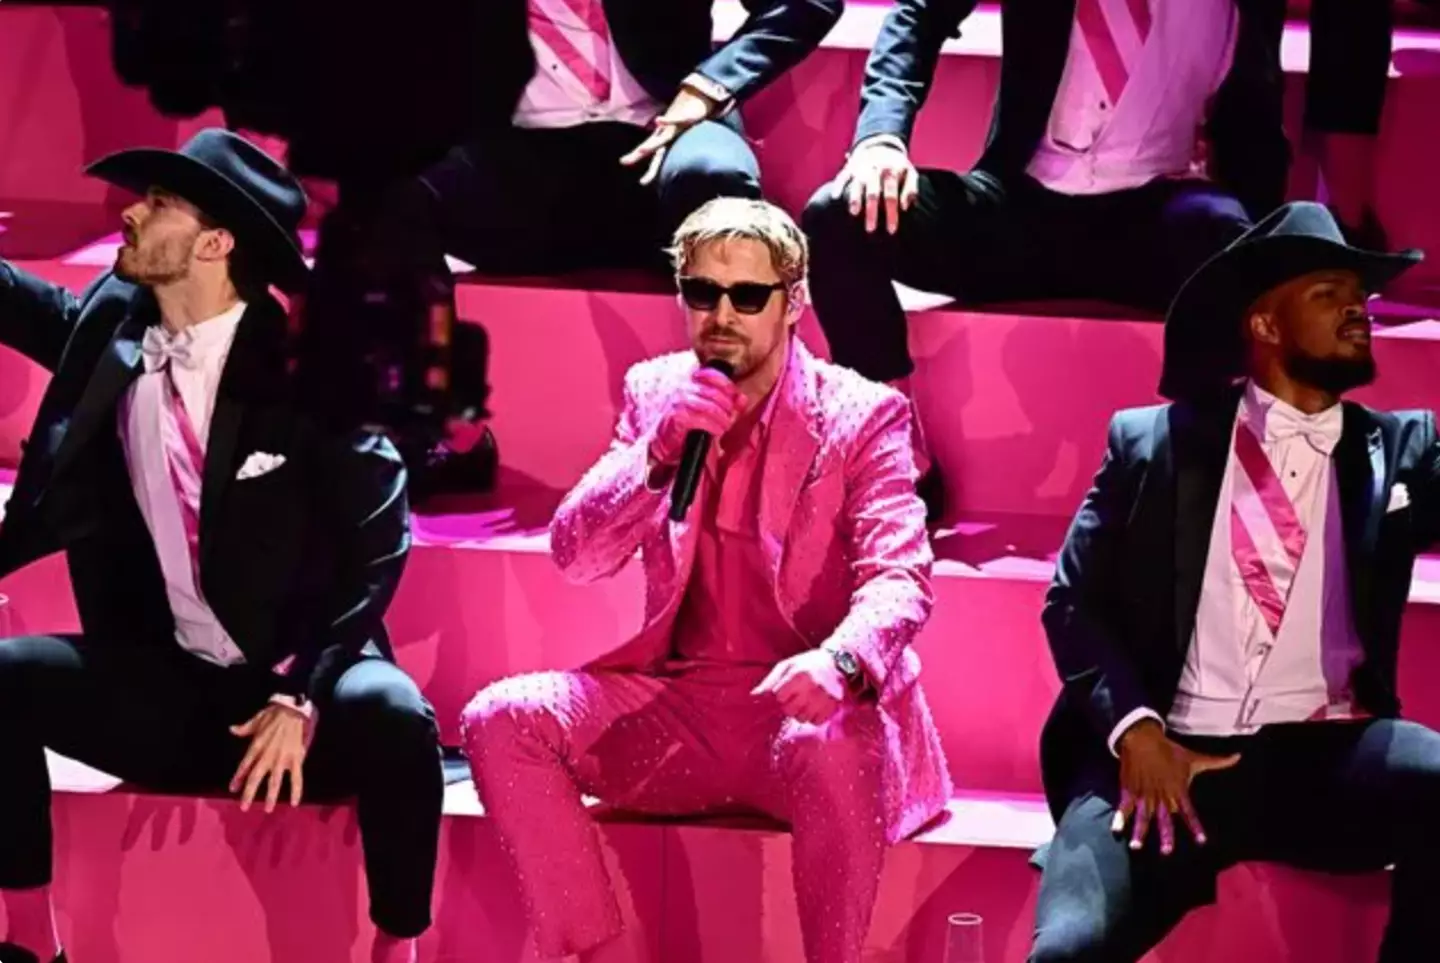 Gosling's 'I'm Just Ken' performance had people thinking he could have been a popstar.